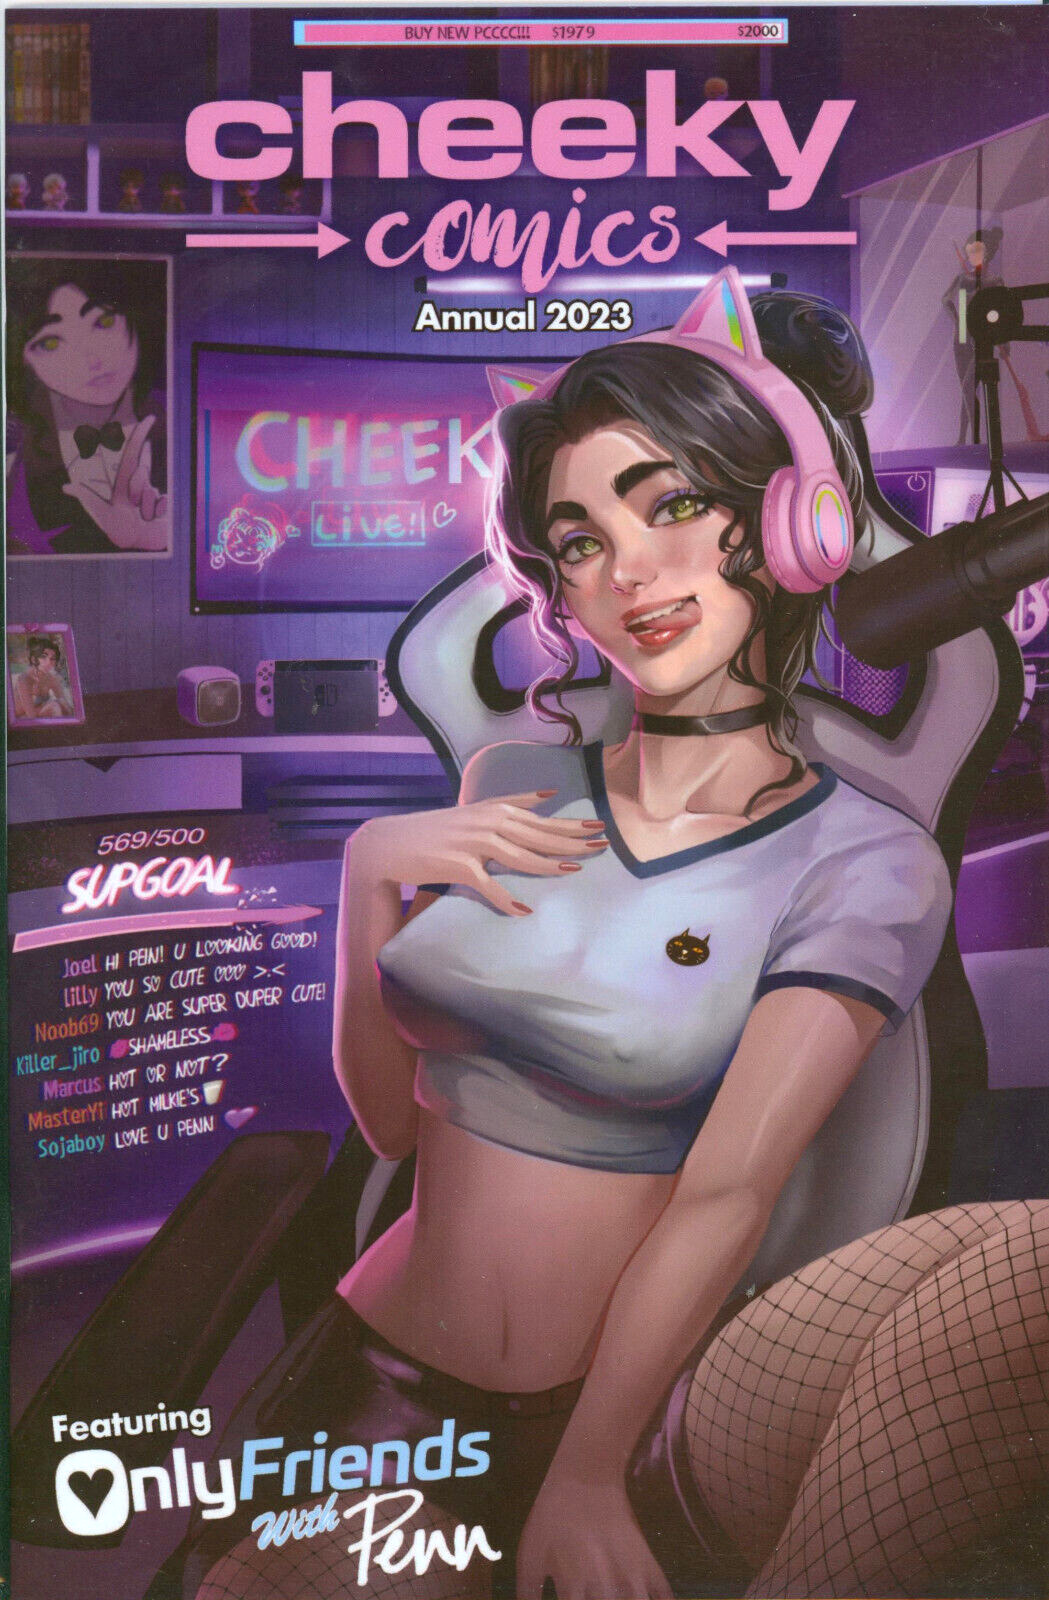 Cheeky Comics Annual 2023 OnlyFriends with Penn Variant Space Between Comics